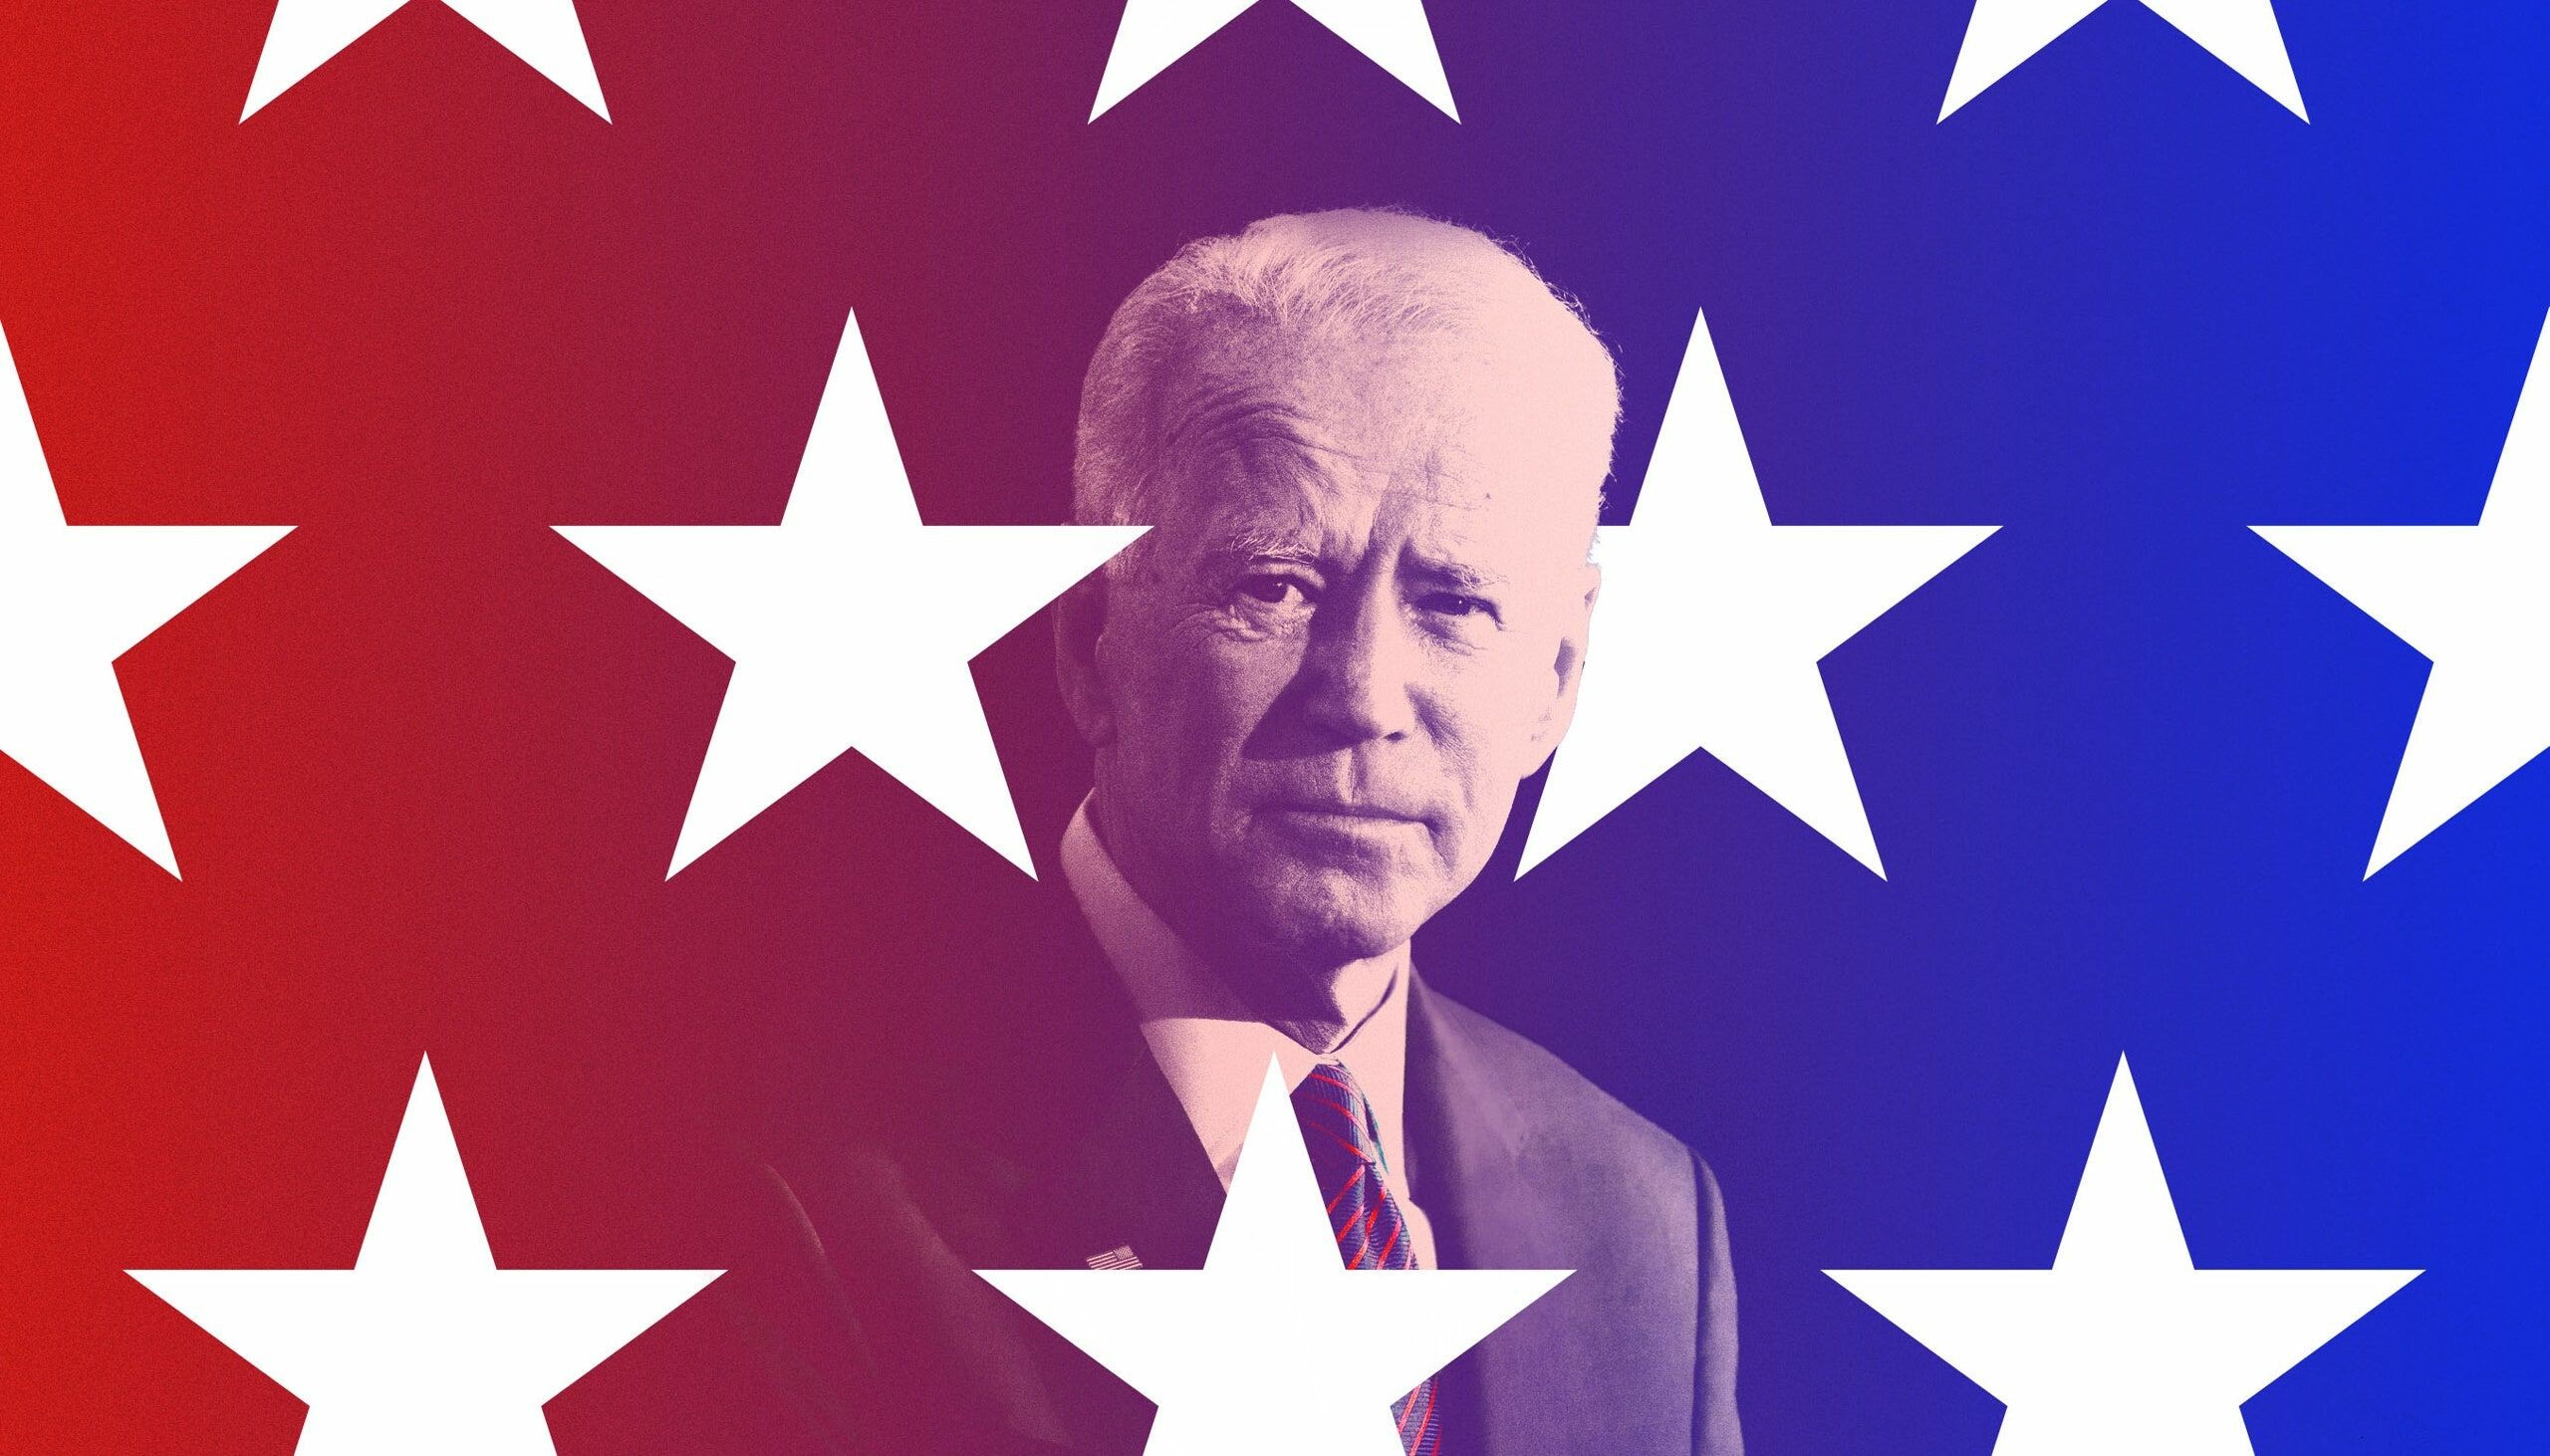 Joe Biden: Defeated incumbents Donald Trump and Mike Pence in the 2020 presidential election. 2560x1470 HD Background.